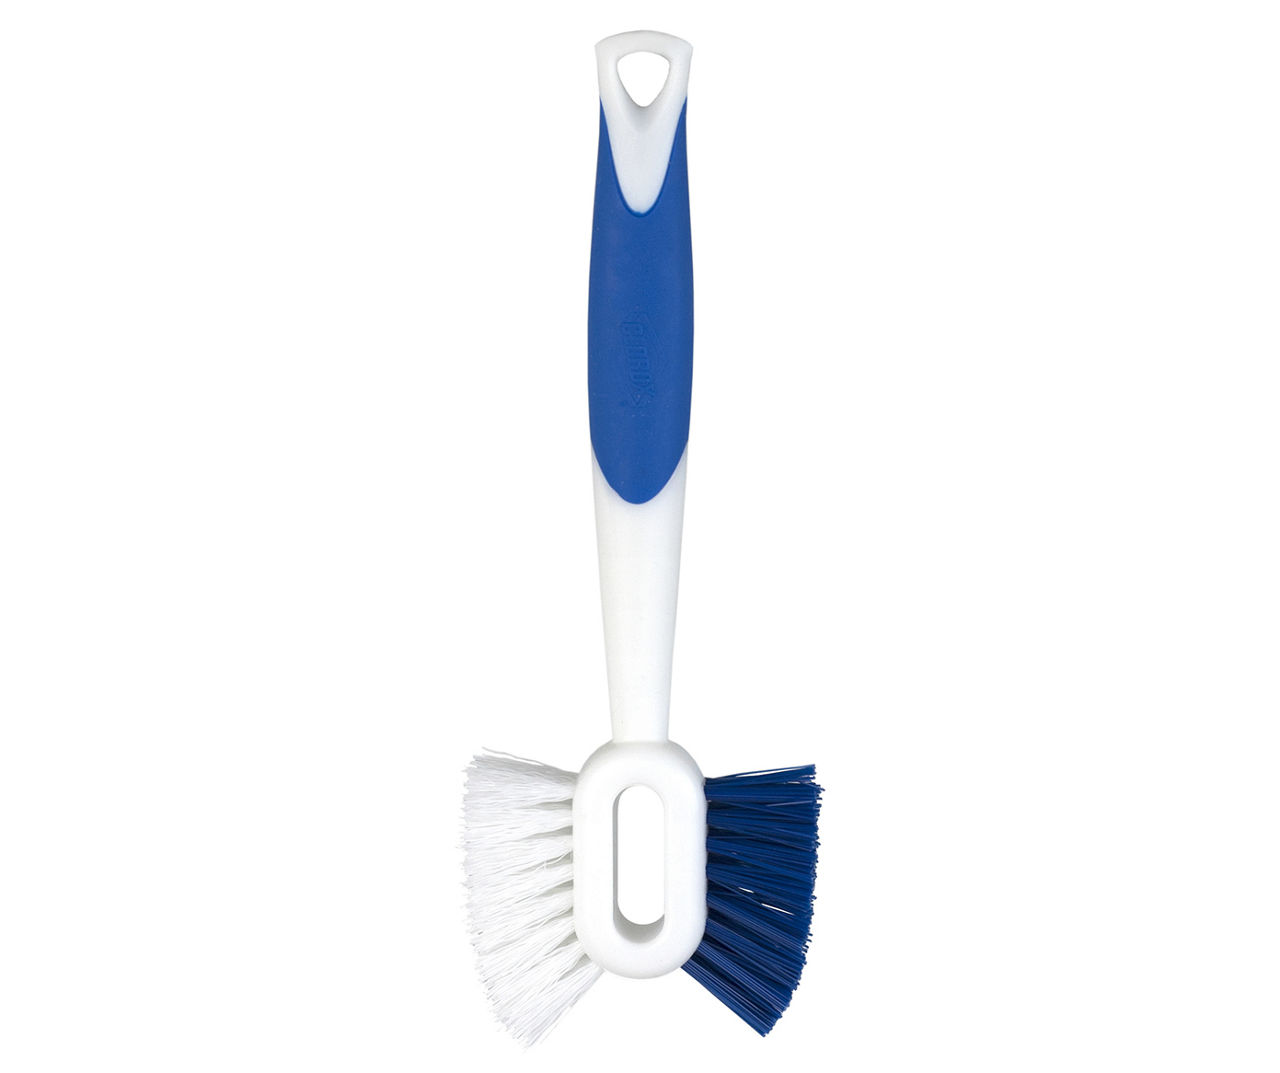 Clorox 2-In-1 Double-Sided Tile and Grout Bathroom Cleaning Brush